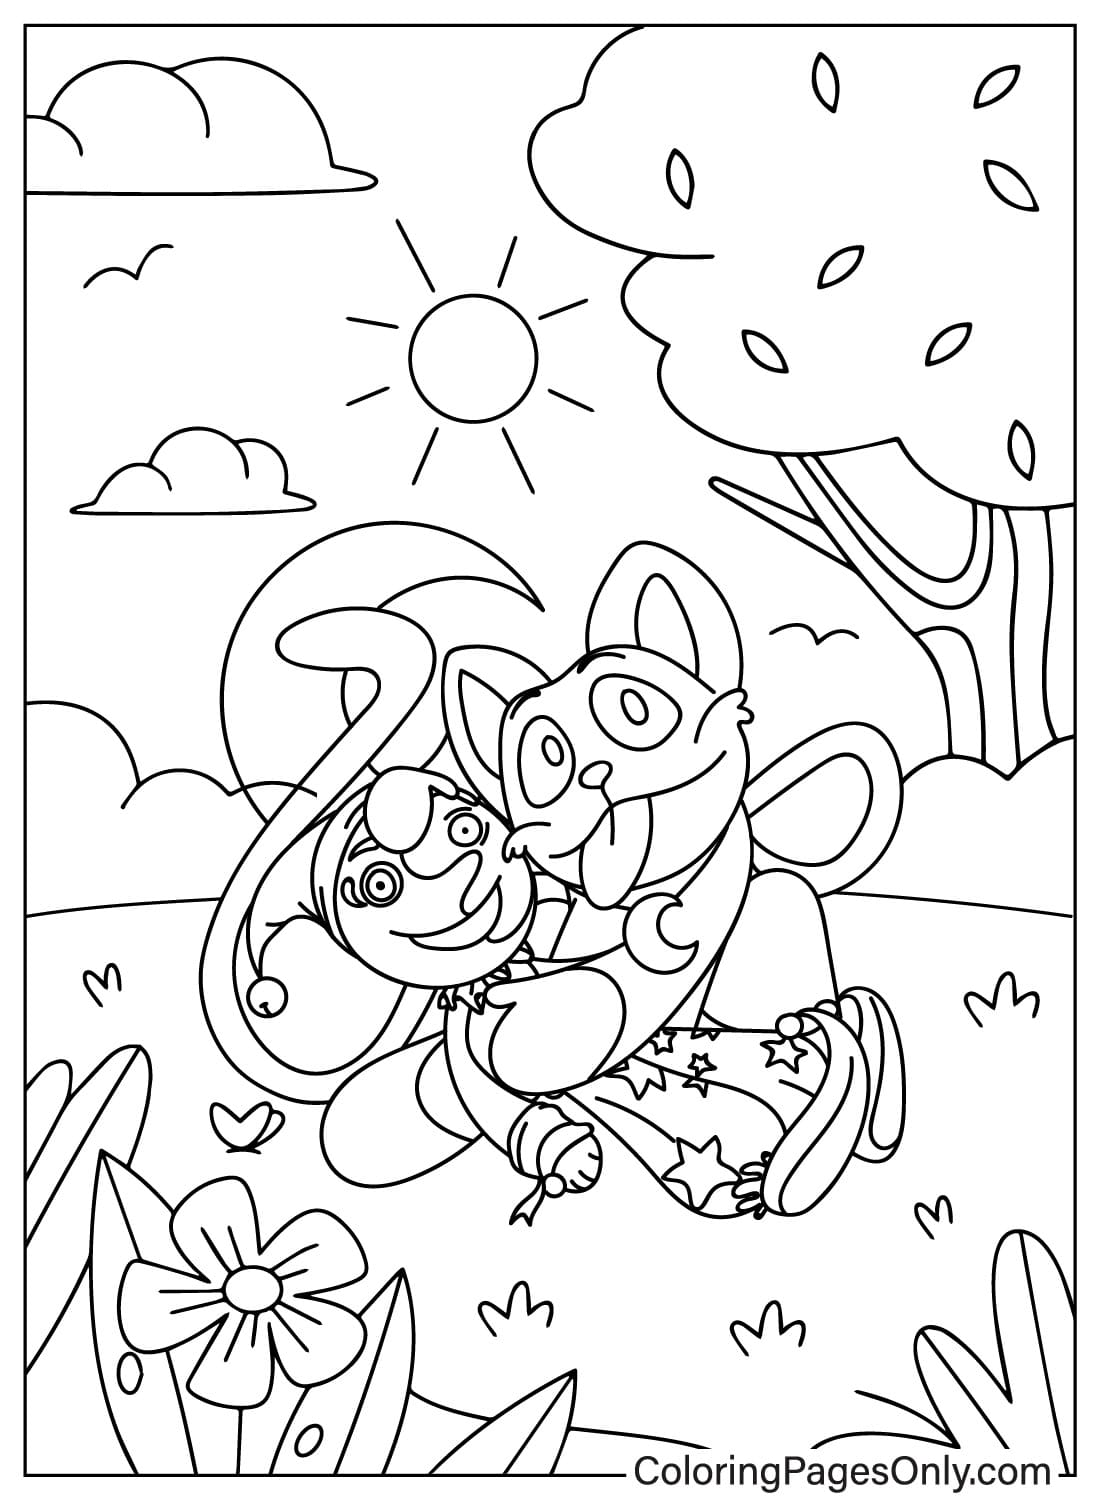 Free CatNap Coloring Page from CatNap